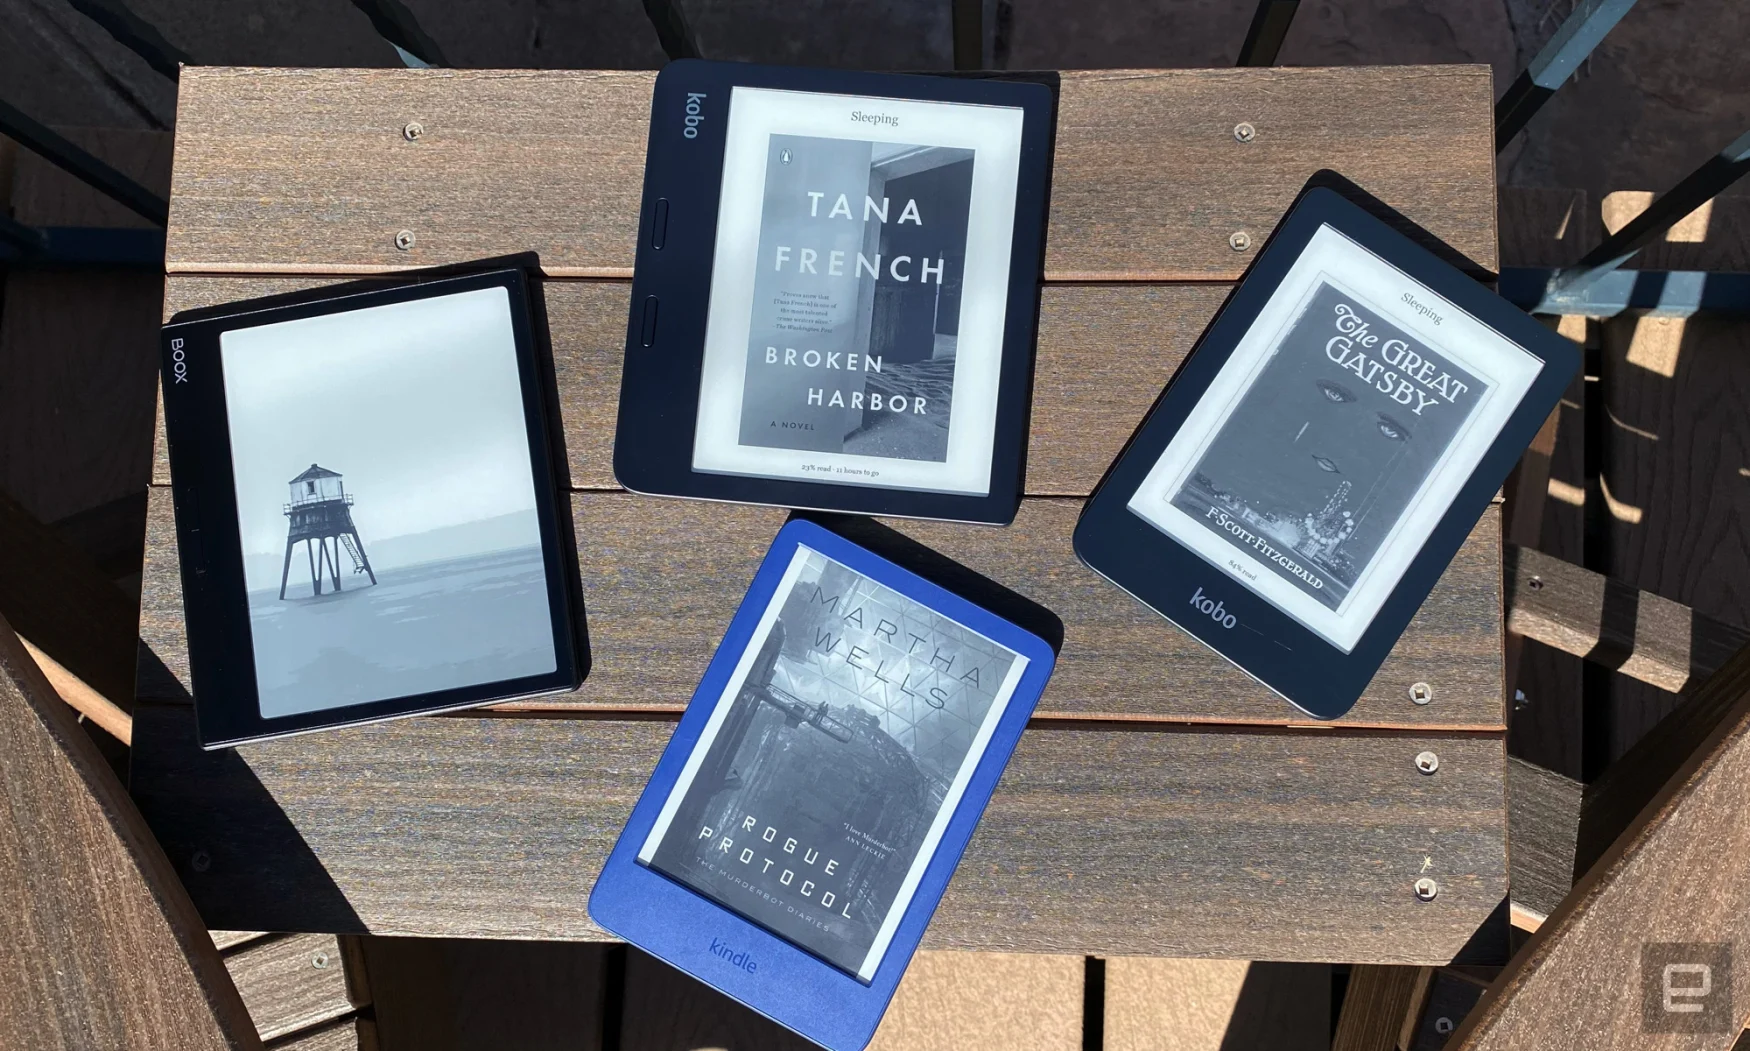 Four ereaders are arranged on a dark brown wooden table outside. There are Boox, Kindle and Kobo devices showing the covers of different novels from Tana French, F. Scott Fitzgerald and Martha Wells.  